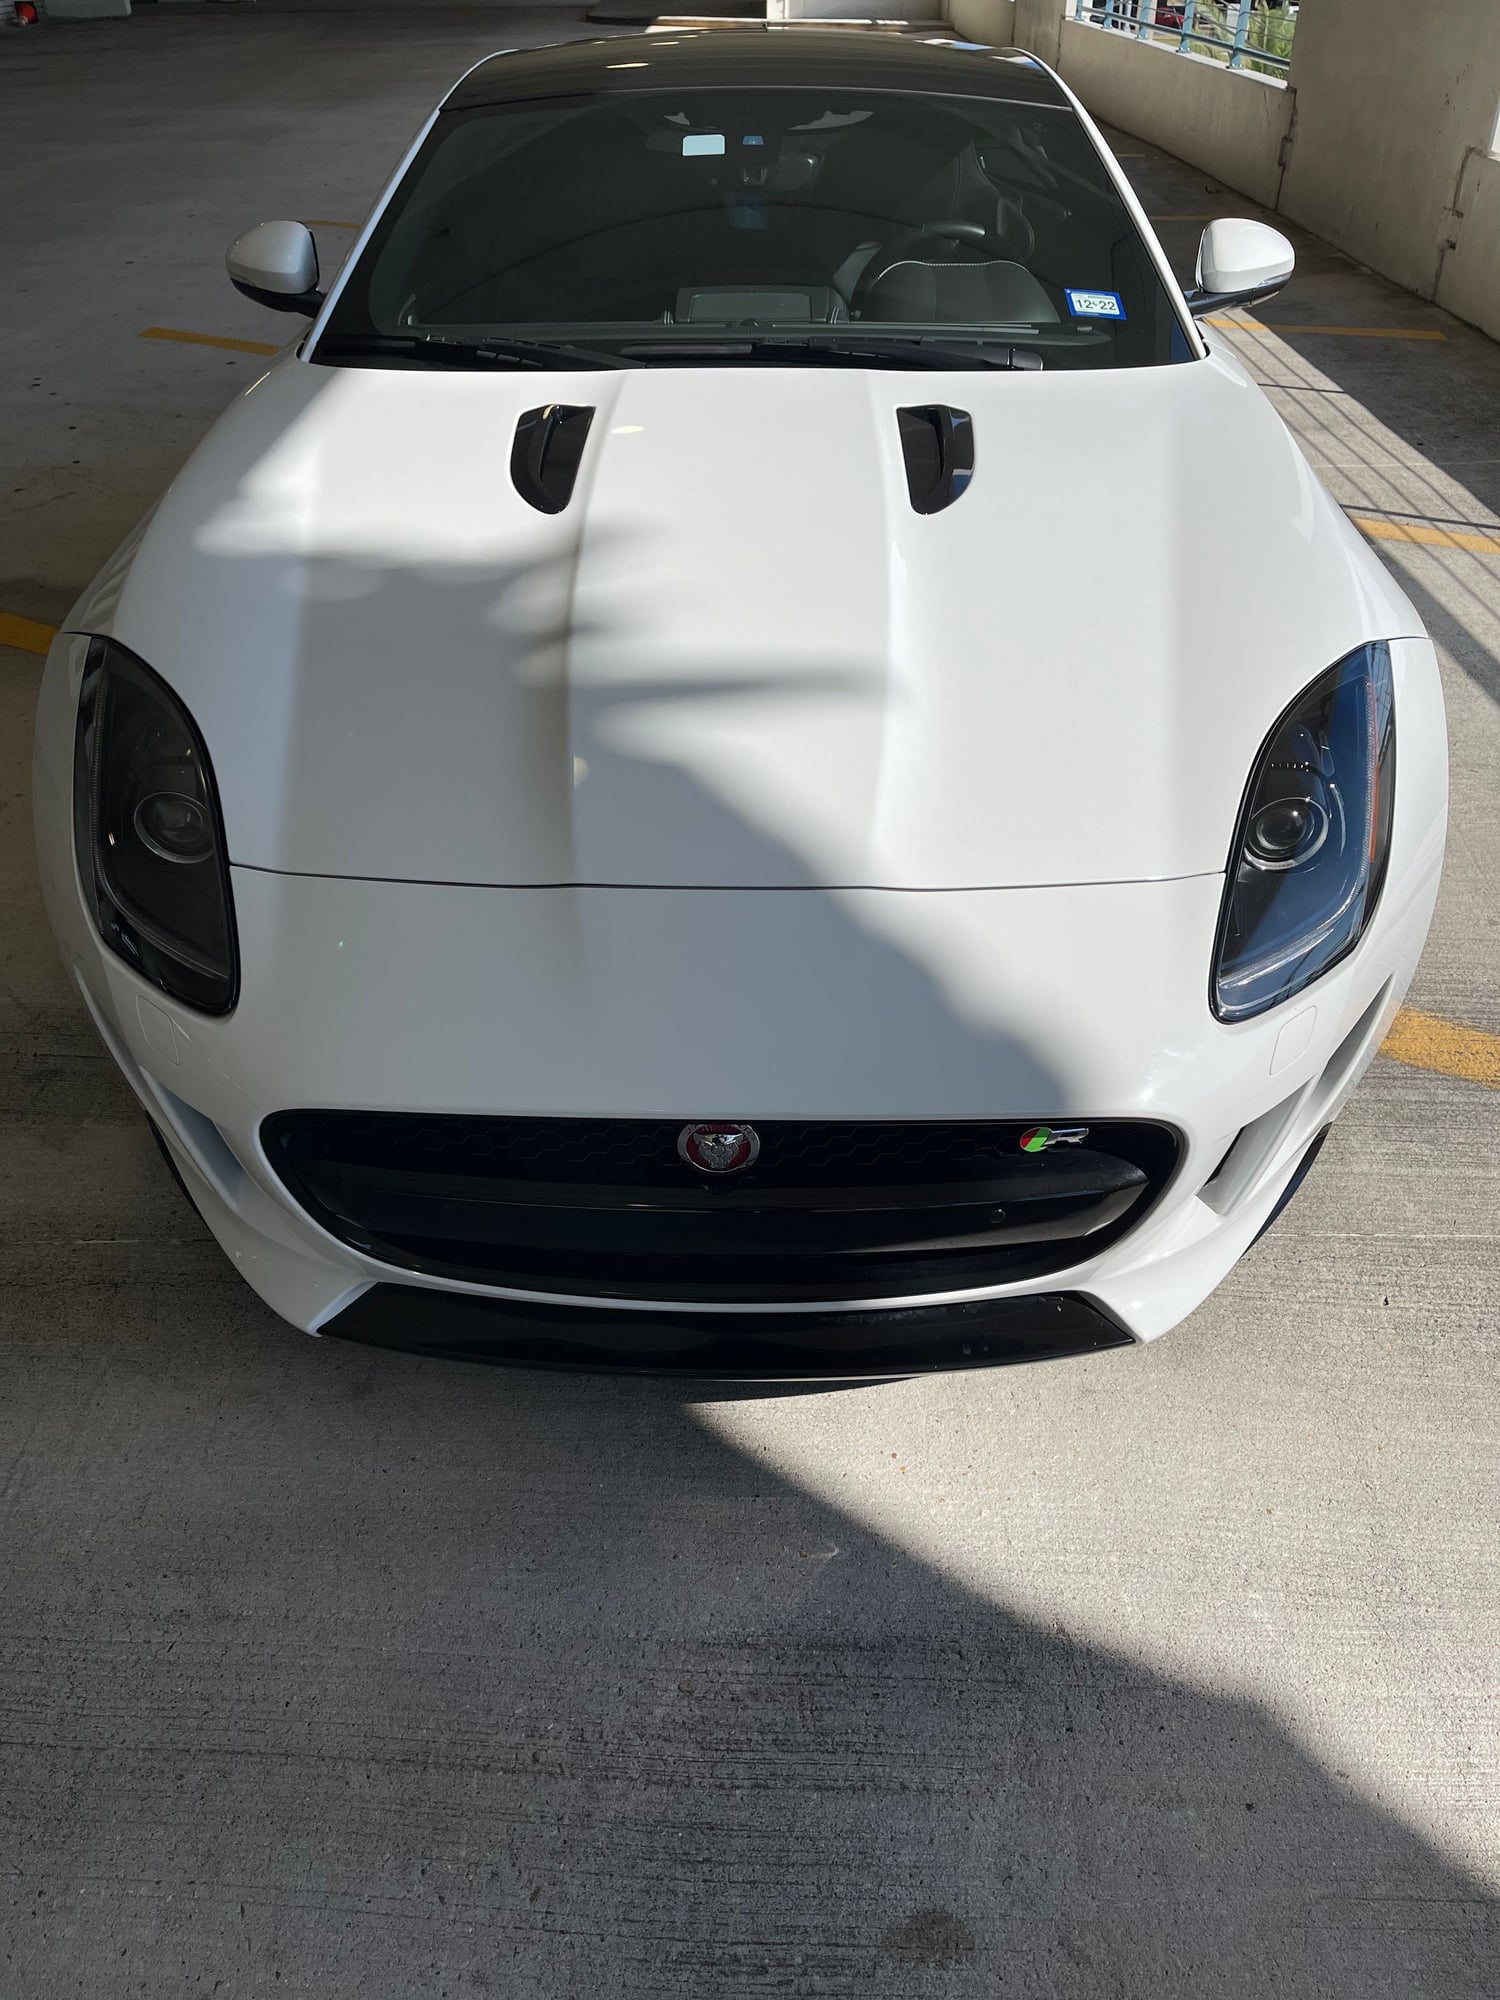 2015 Jaguar F-Type - Excellent 2015 Jaguar F-Type R For Sale - Used - VIN SAJWA6DA5FMK19861 - 11,812 Miles - 8 cyl - 2WD - Automatic - Coupe - White - Houston, TX 77002, United States